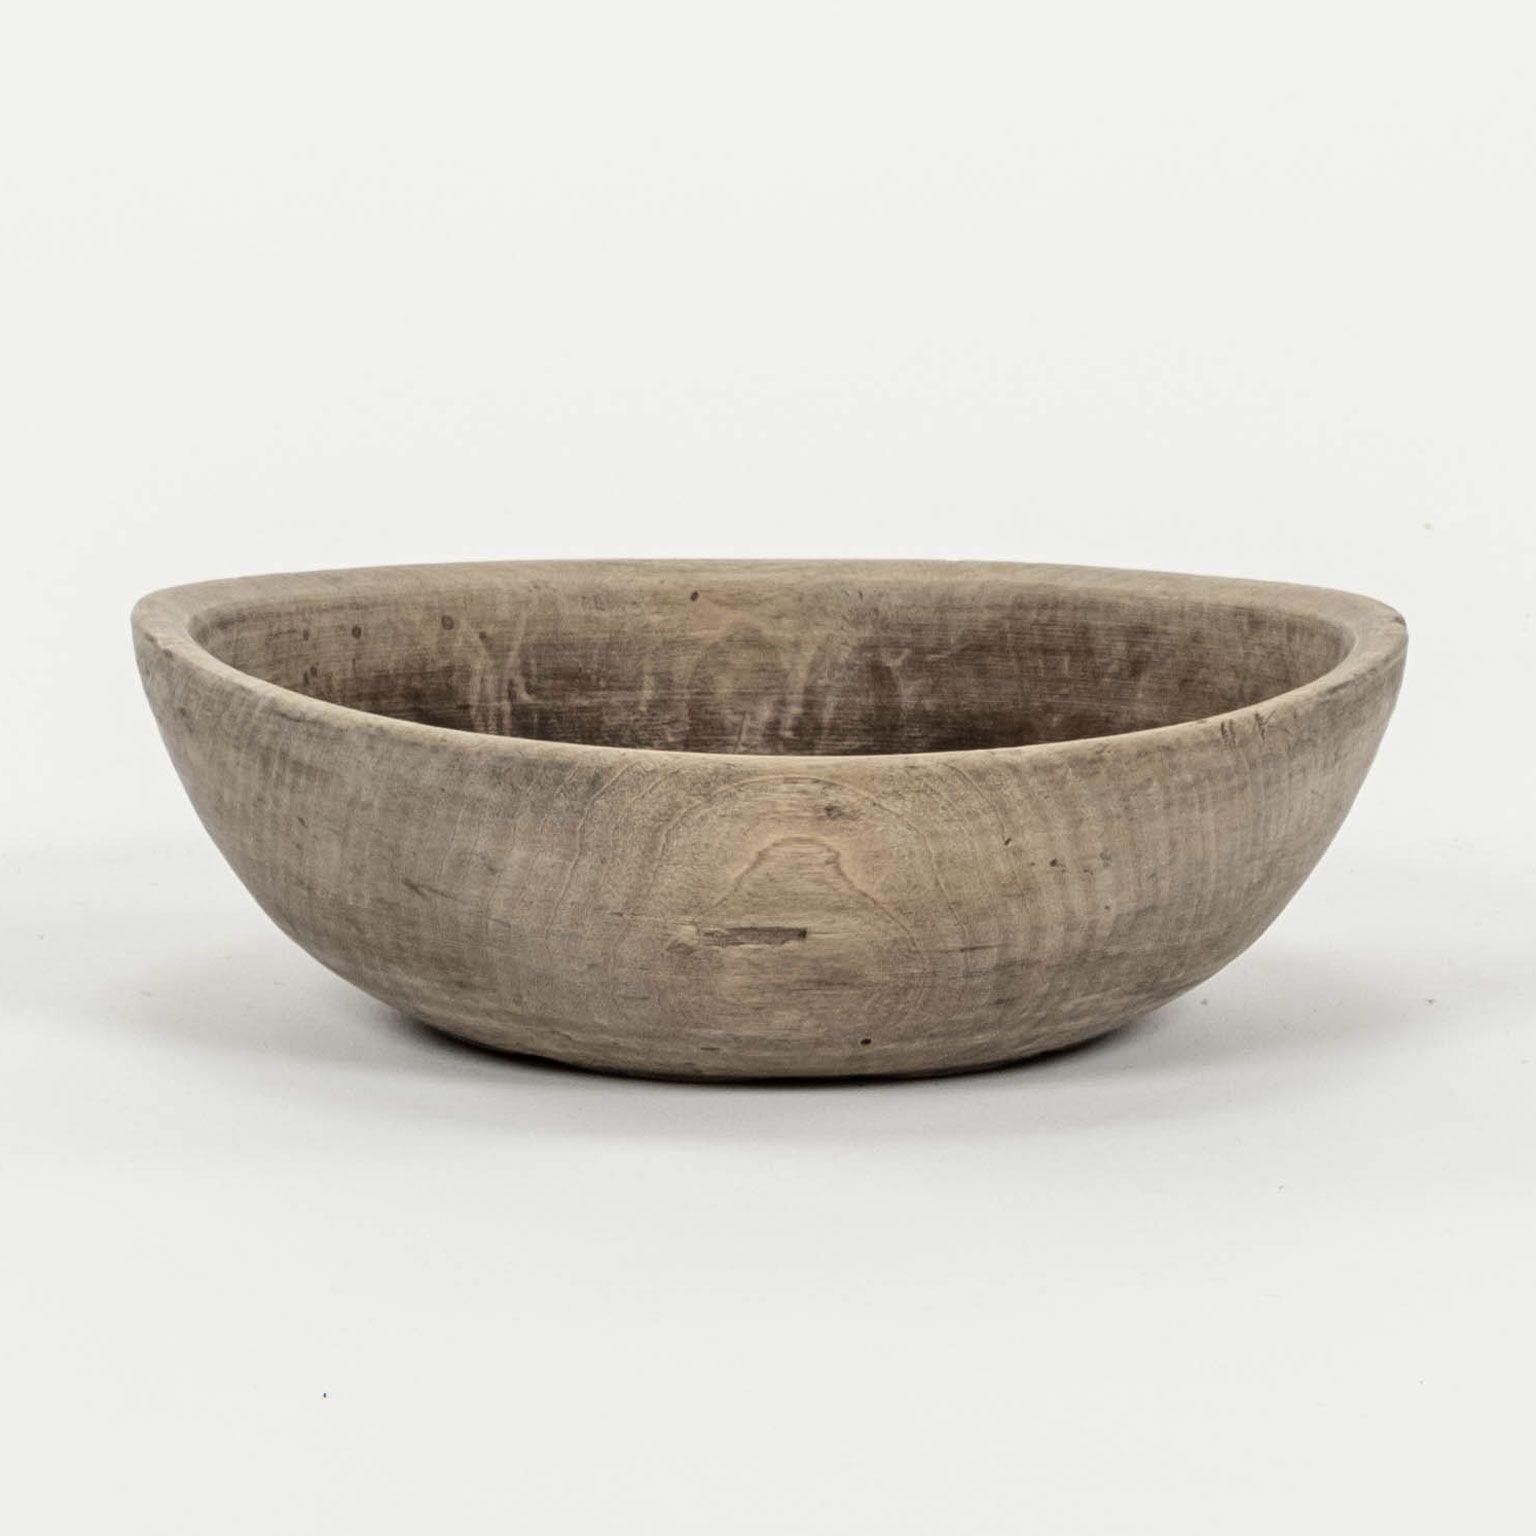 Rustic Swedish herb turned bowl with maker's brands. Incised line markings from lathe run counter to the grain and wood striation of bowl creating a subtle, gorgeous patterned effect across surface. Finish is a dry grayish mid-brown color. Marked